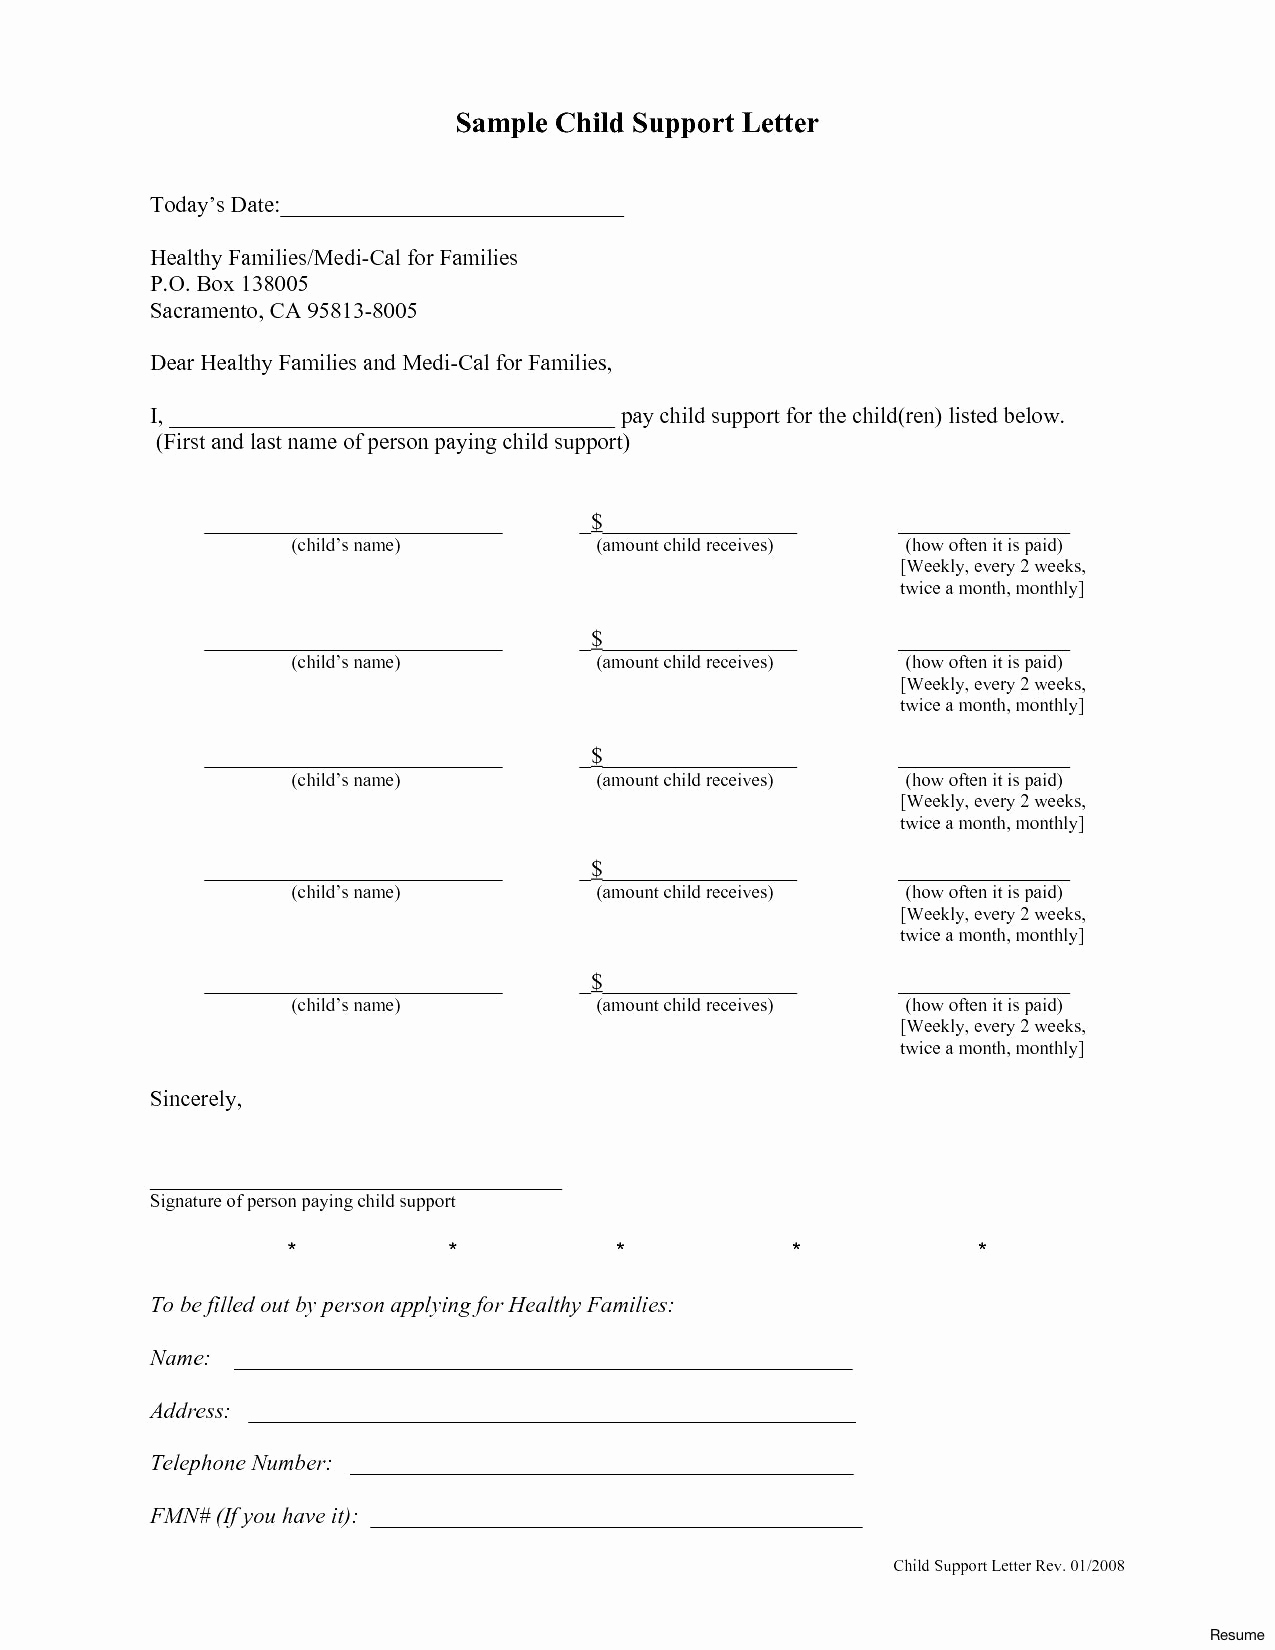 Sample Child Support Letter Template - Child Support Letters Sample Lovely Sample Child Support Letter